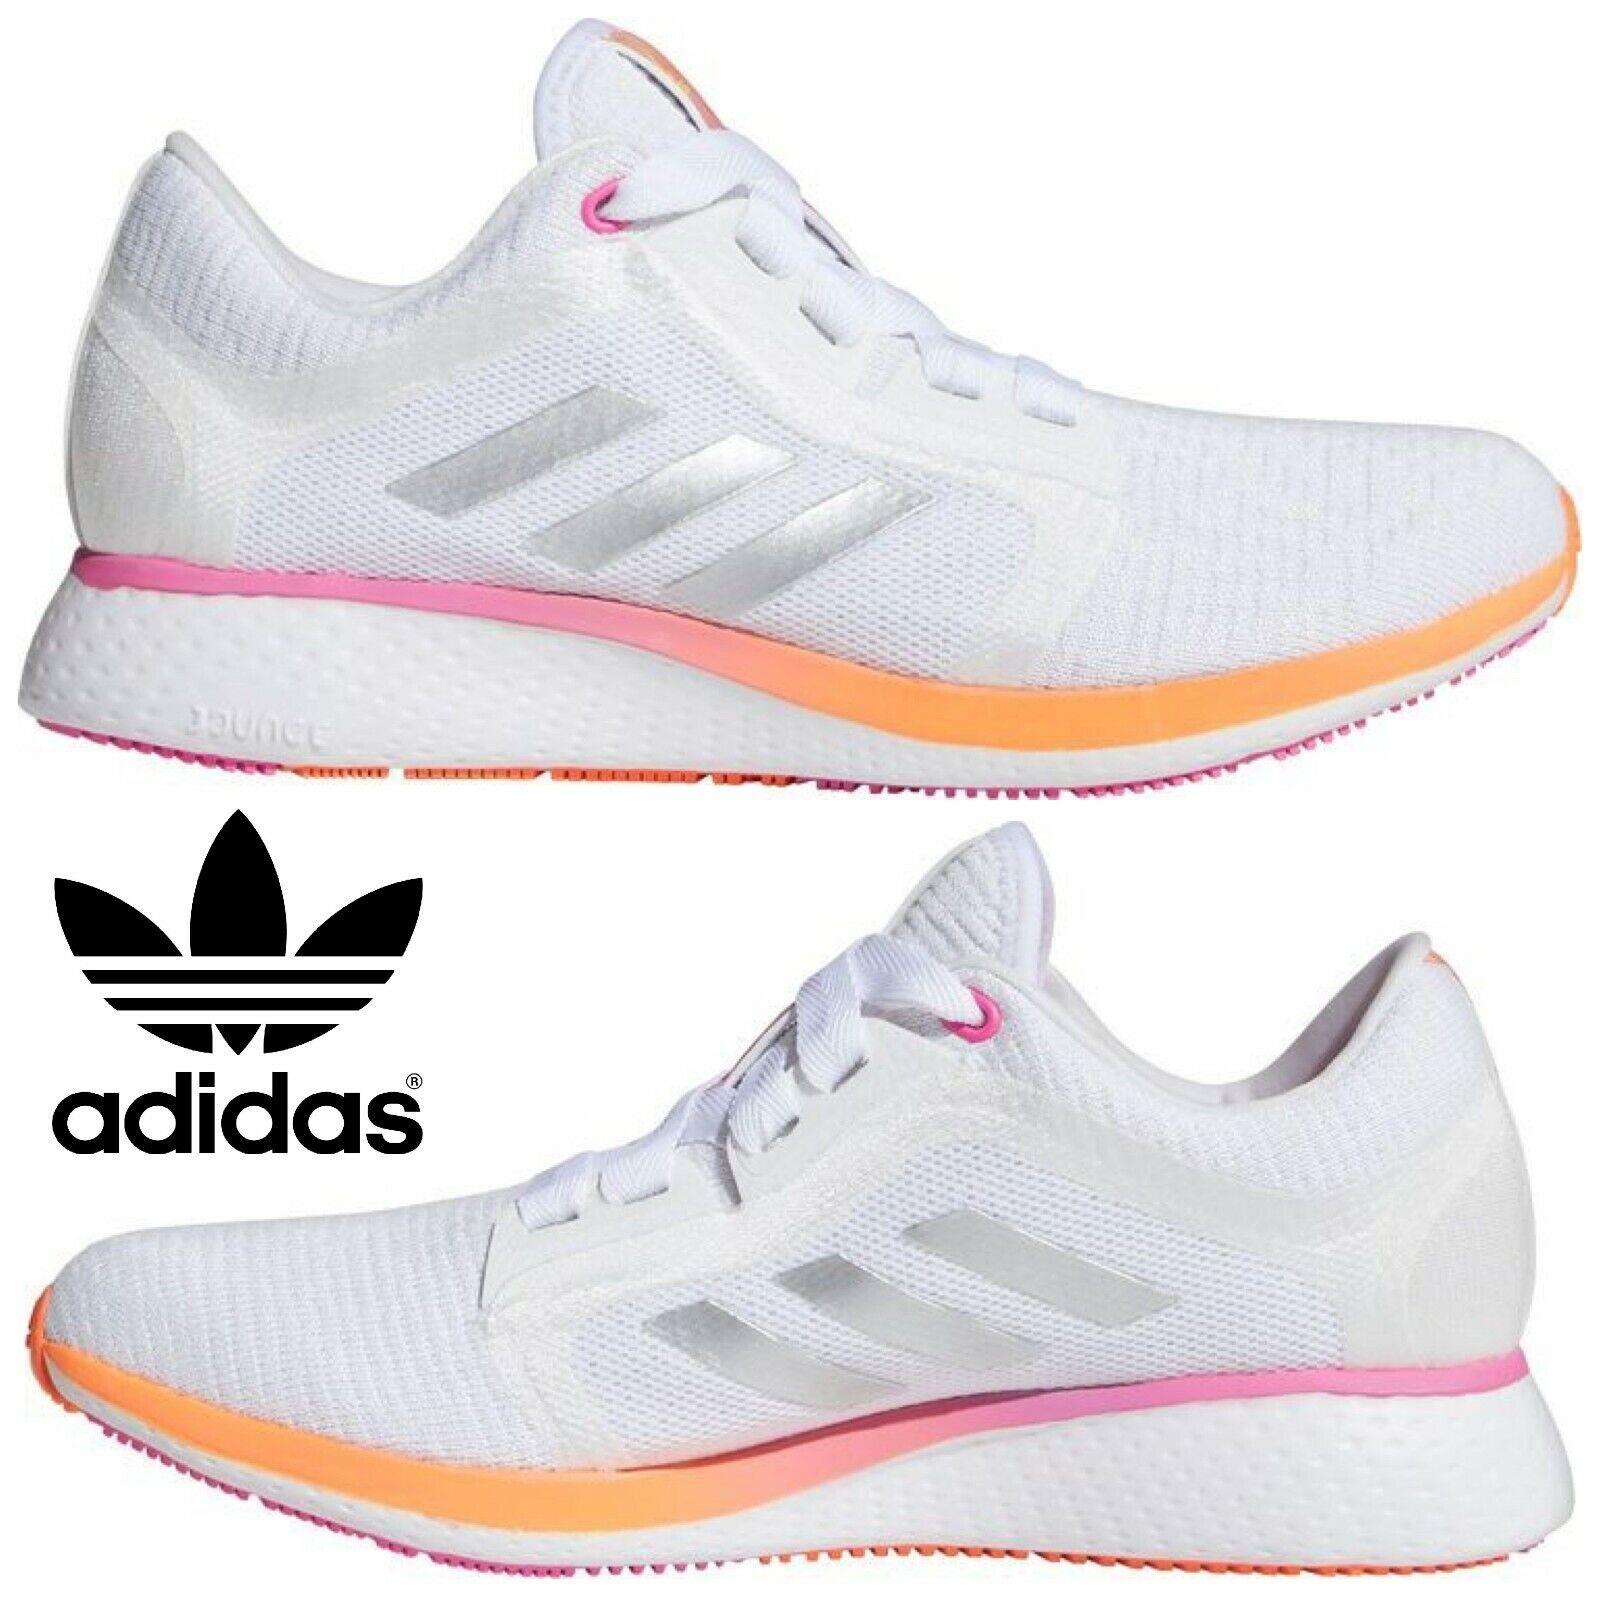 Adidas Edge Lux 4 Women`s Sneakers Sport Running Gym Comfort Athletic Shoes - White , WHITE/PINK/YELLOW Manufacturer